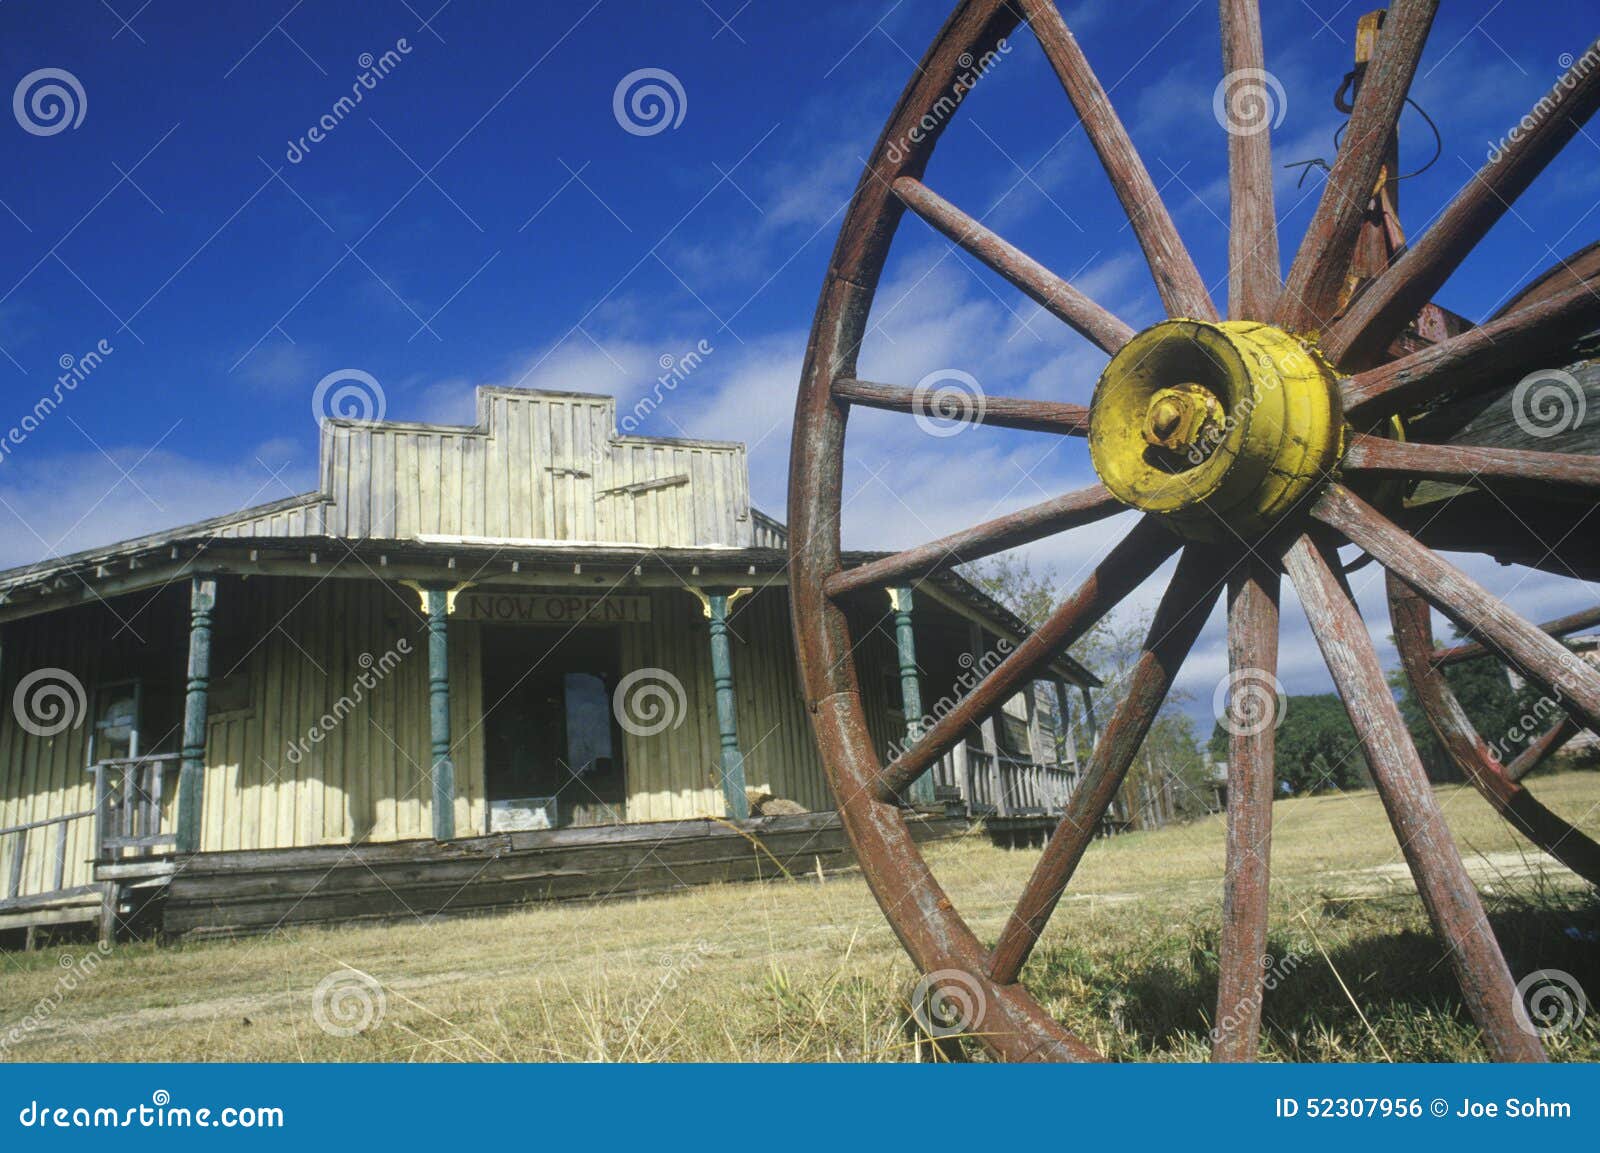 wagon wheel and old building in south tx ghost town